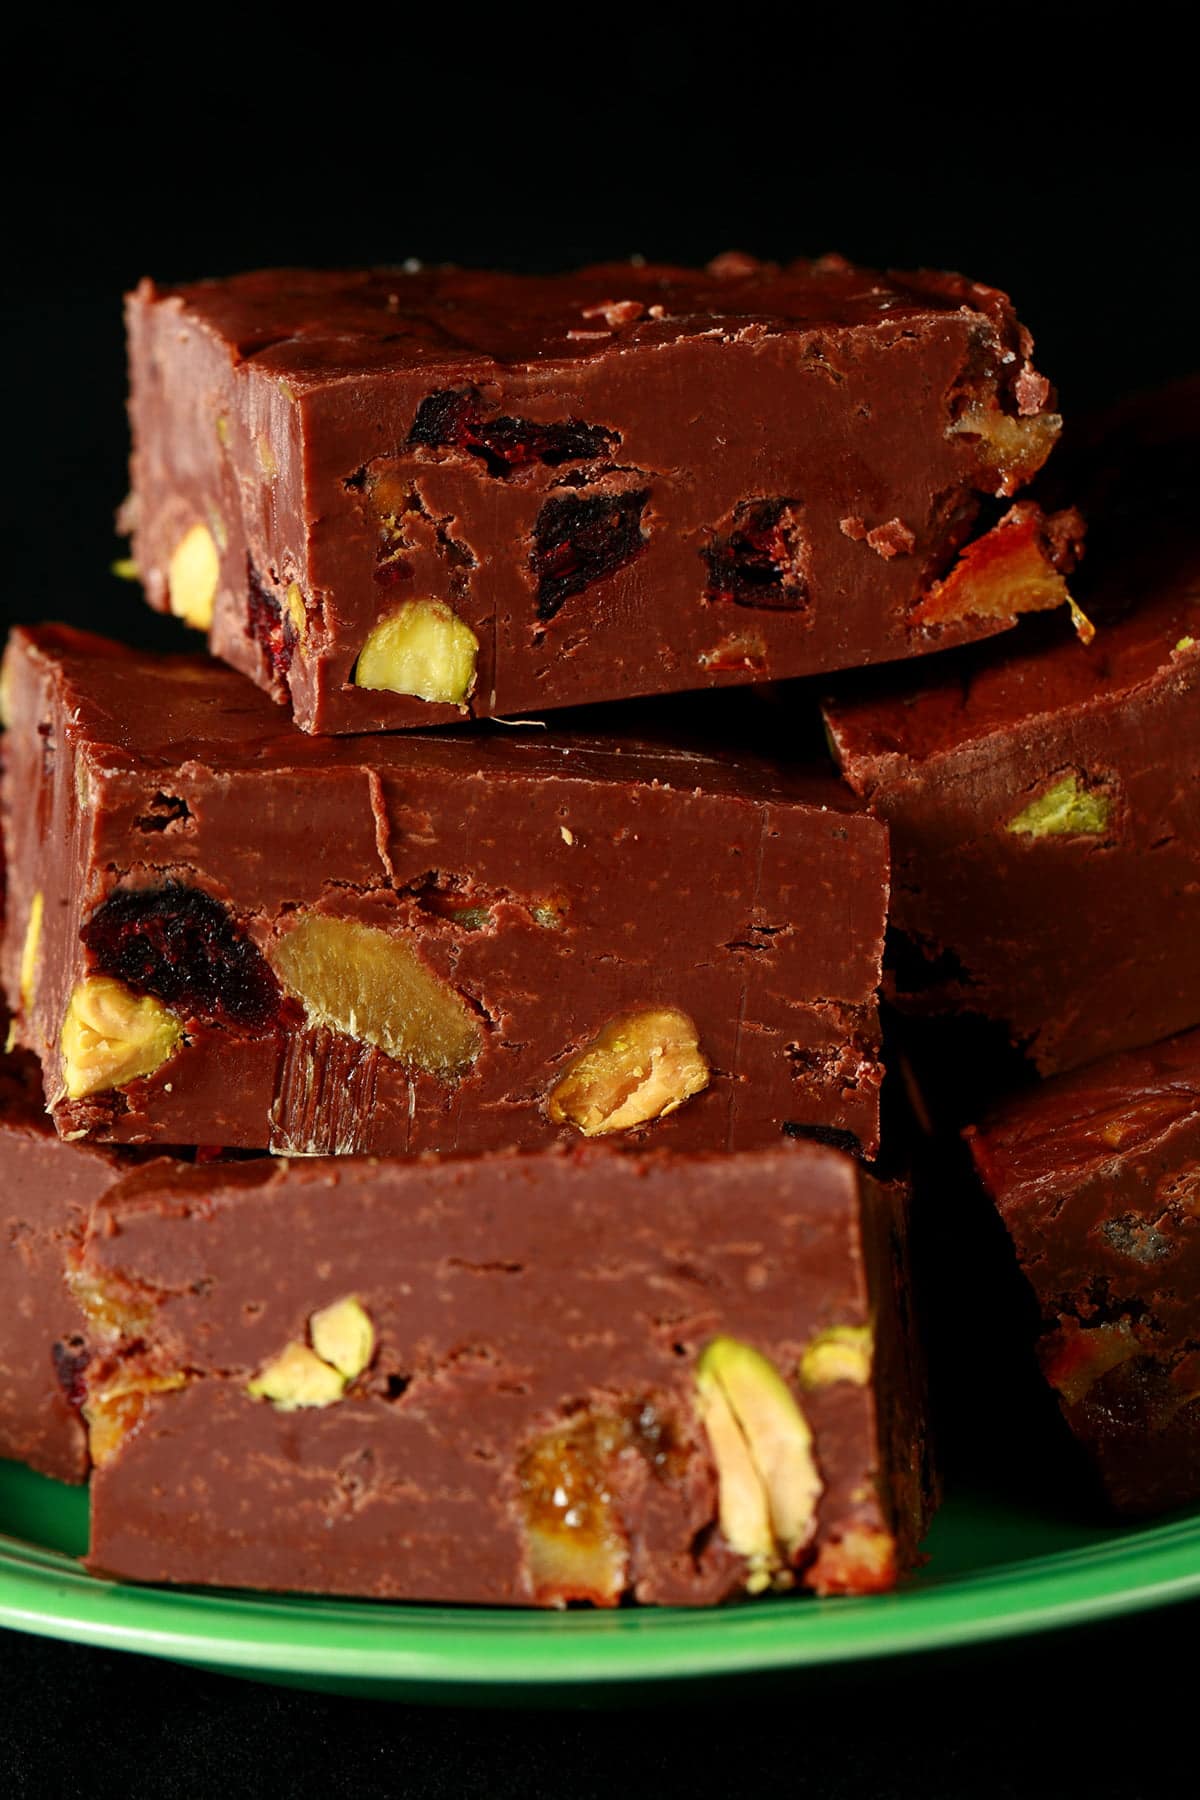 A green plate with a pile of chocolate fudge on it. Each square of fudge is studded with nuts, dried cranberries, candied orange peel, and candied ginger.